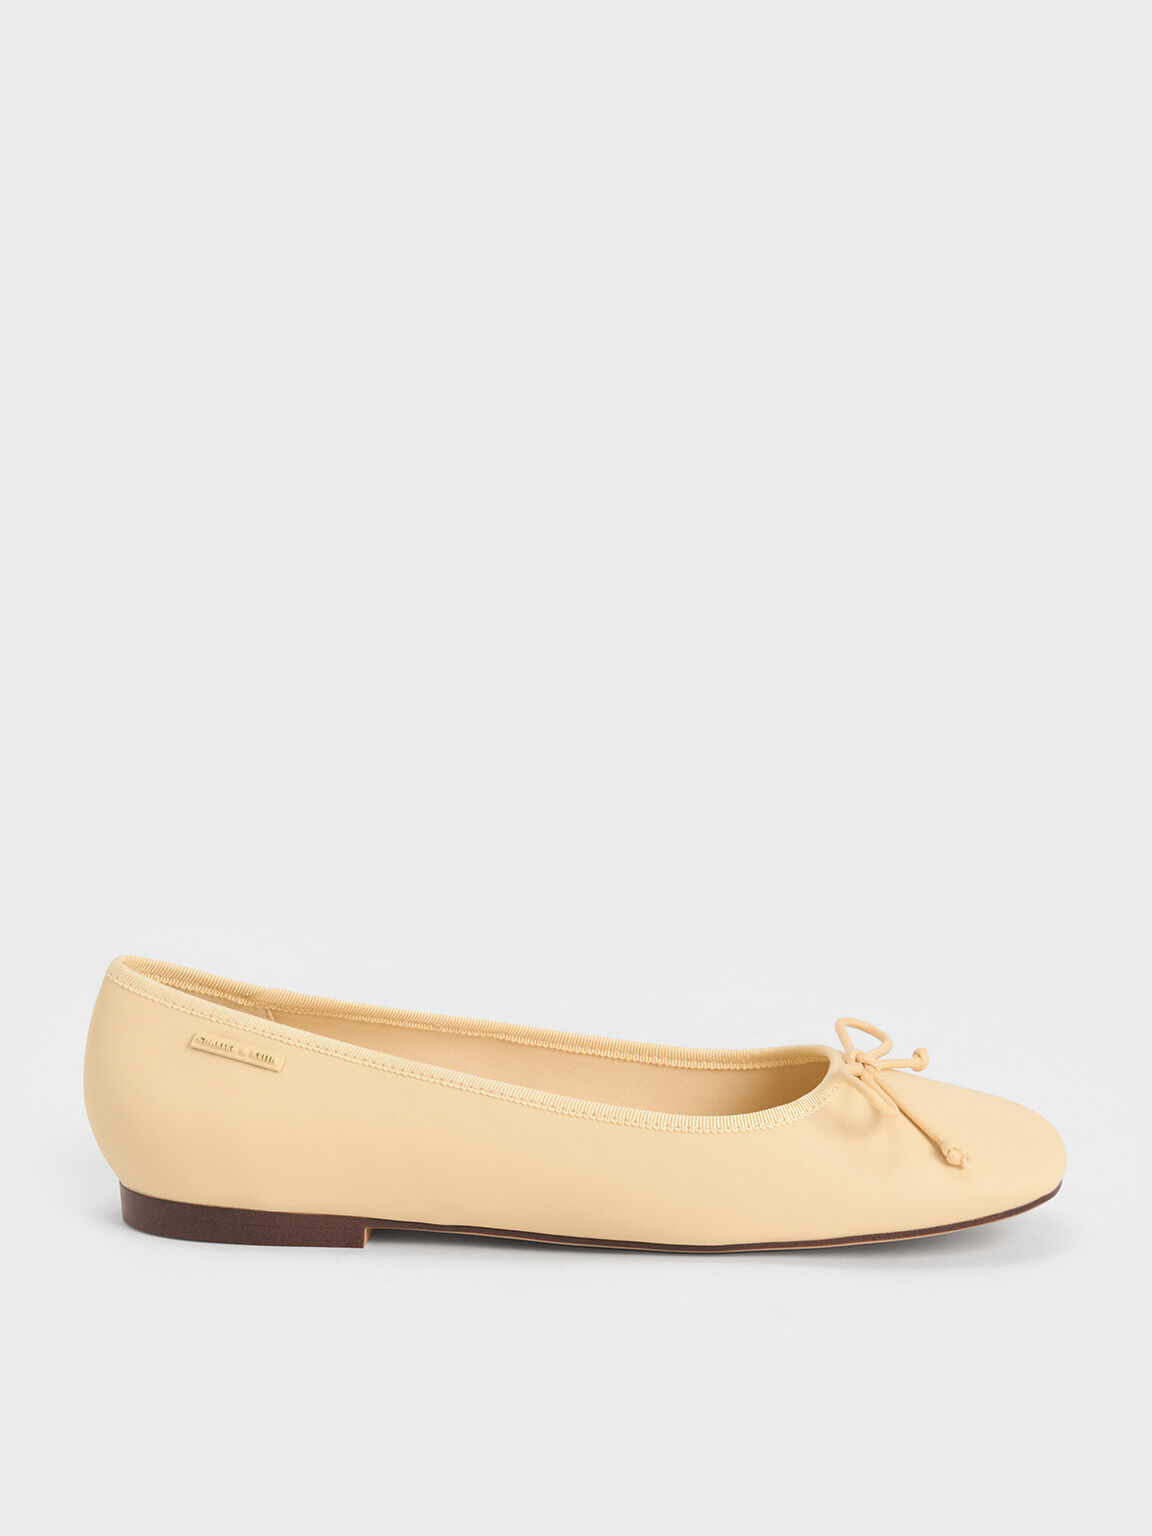 Rounded Square-Toe Bow Ballerinas, Yellow, hi-res